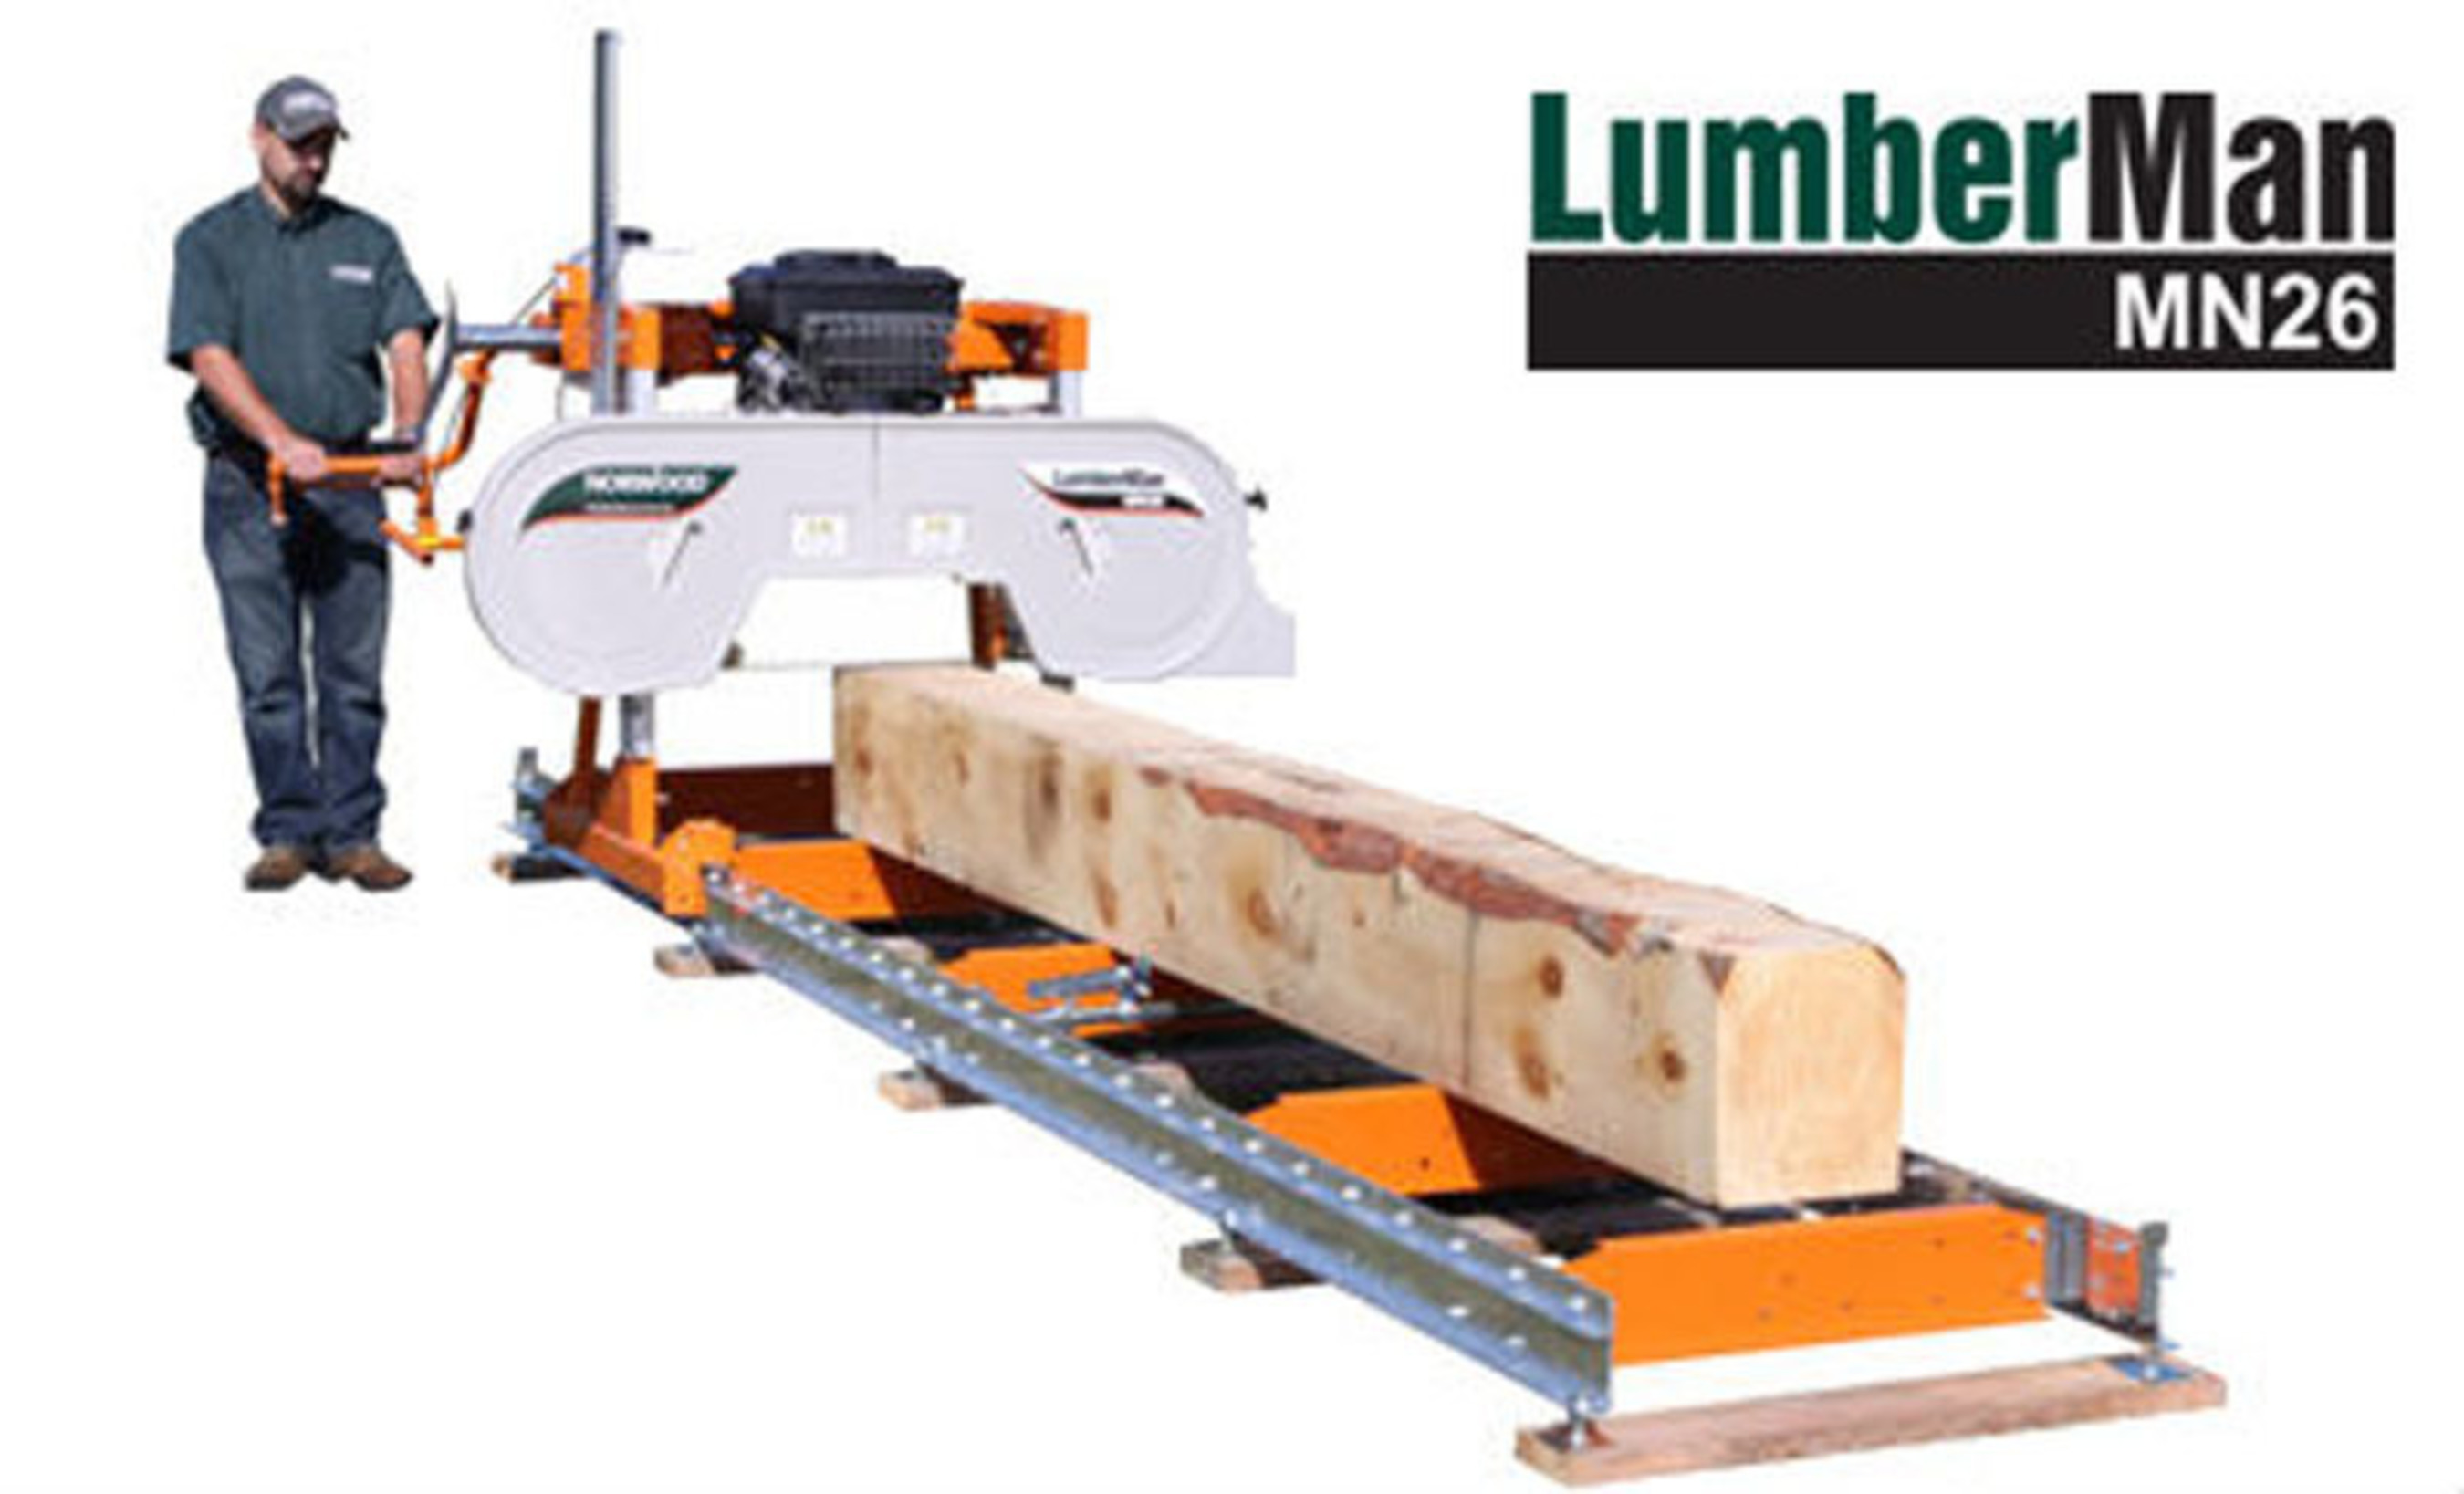 Norwood Launches the LumberMan MN26 Portable Sawmill for Hobbyists and Woodworking Enthusiasts
 (PRNewsFoto/Norwood Industries Inc.)